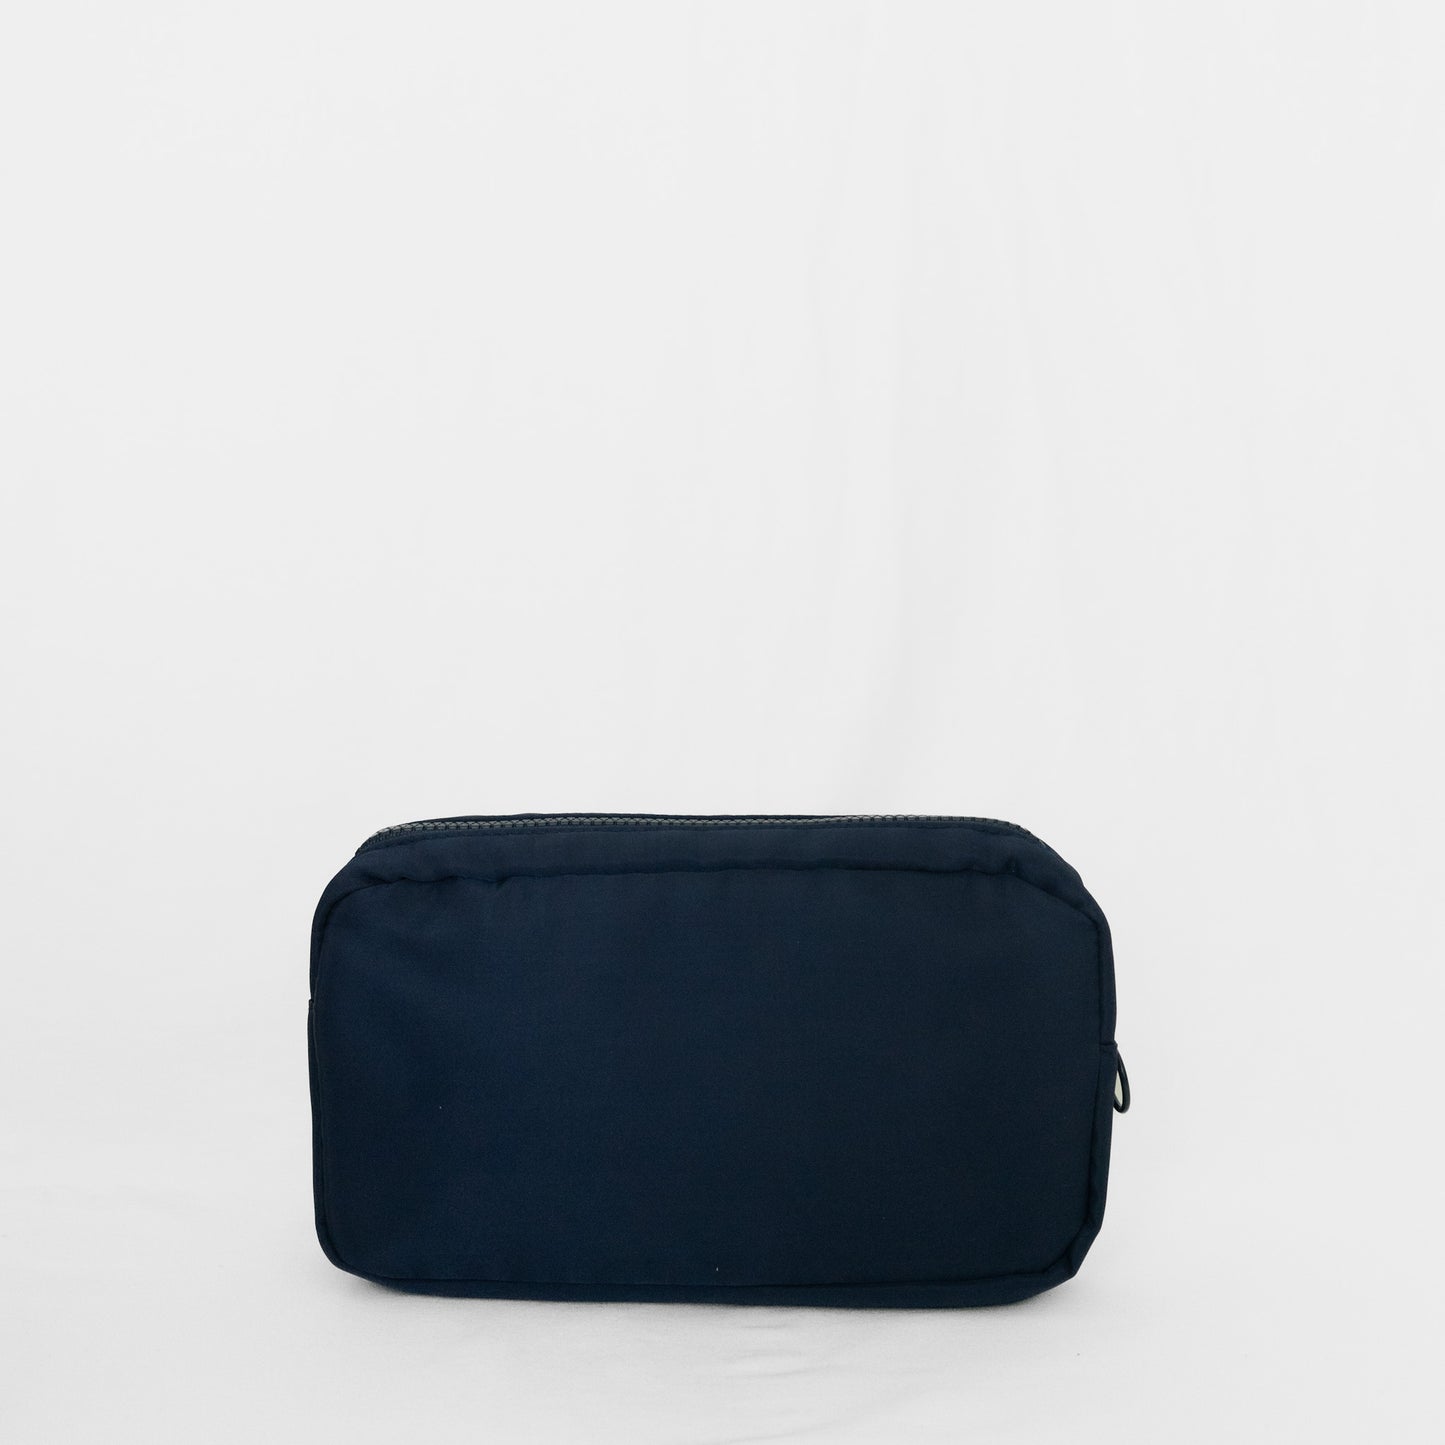 GW Essentials Nylon Pouch - Navy - Give Wink